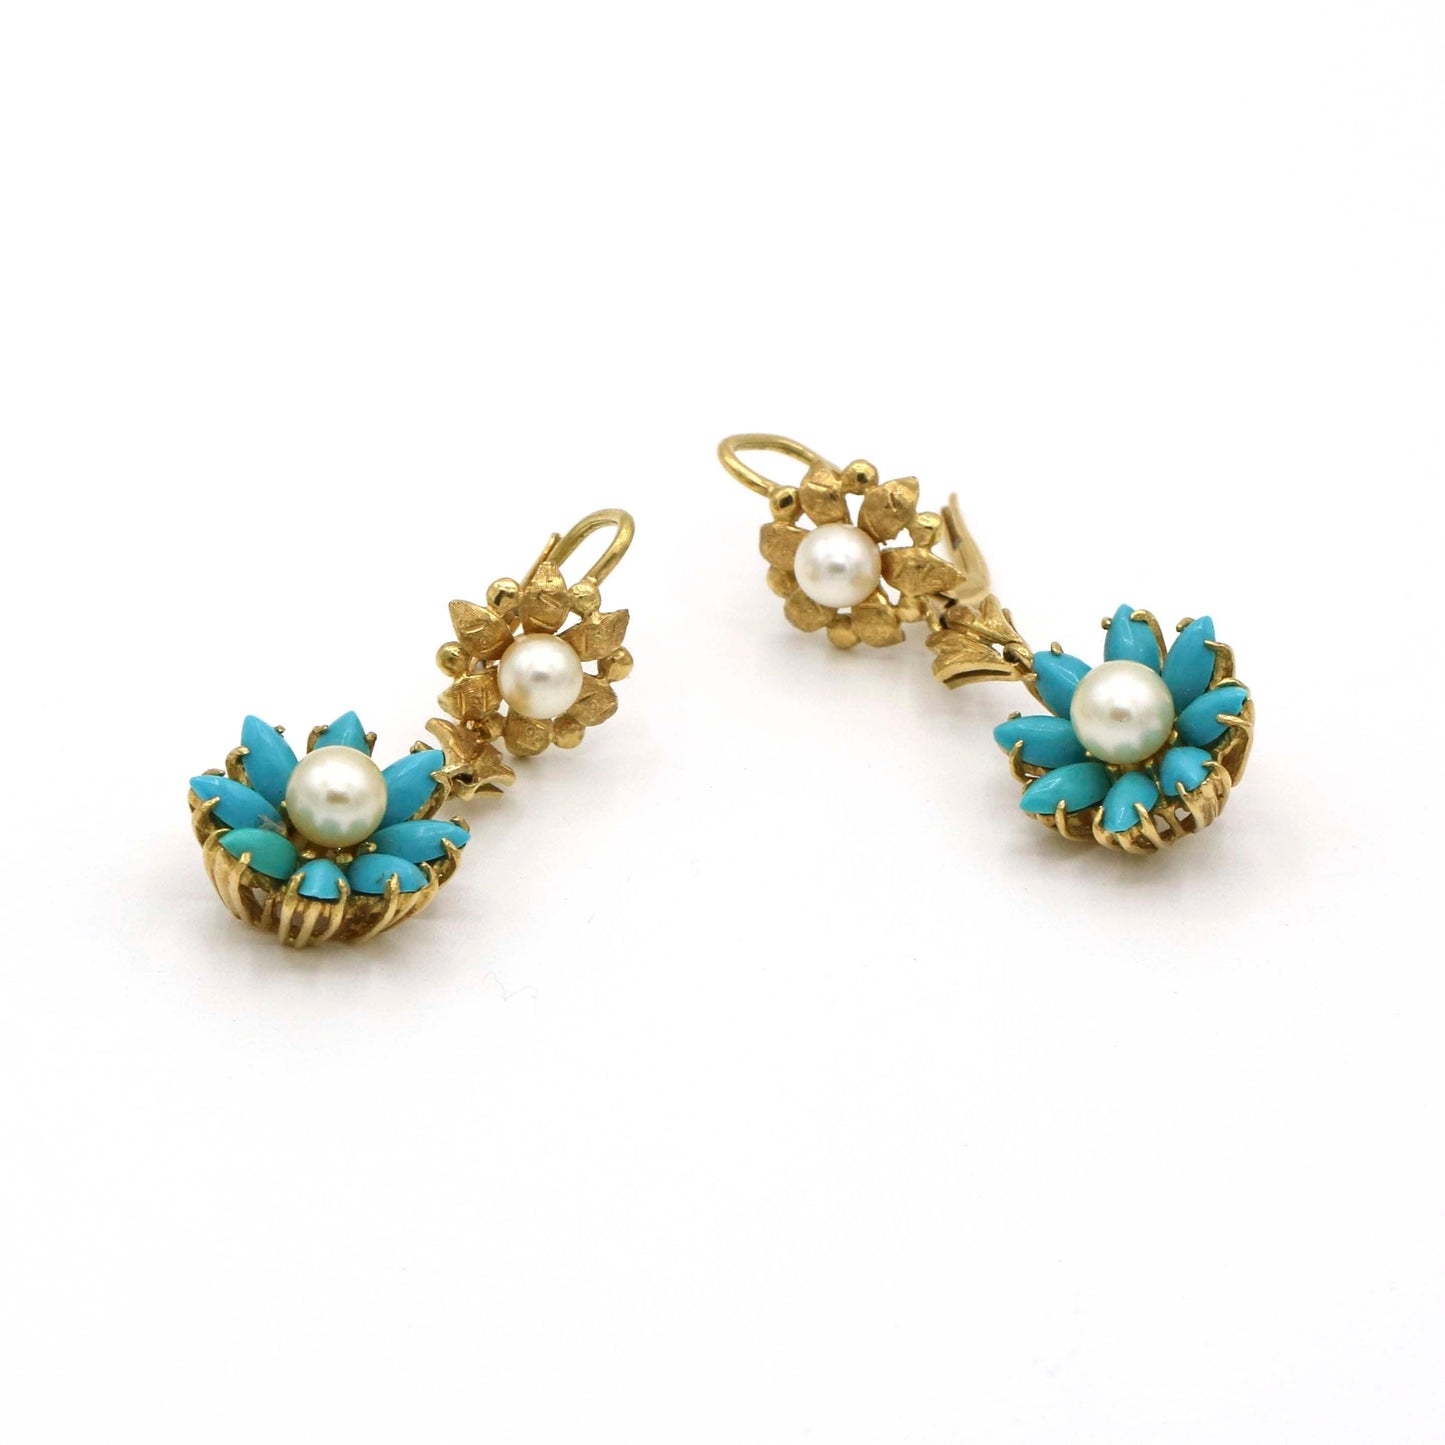 Davide Molina Women's Statement Earrings in 18k Yellow Gold Pearl Turquoise - 31 Jewels Inc.